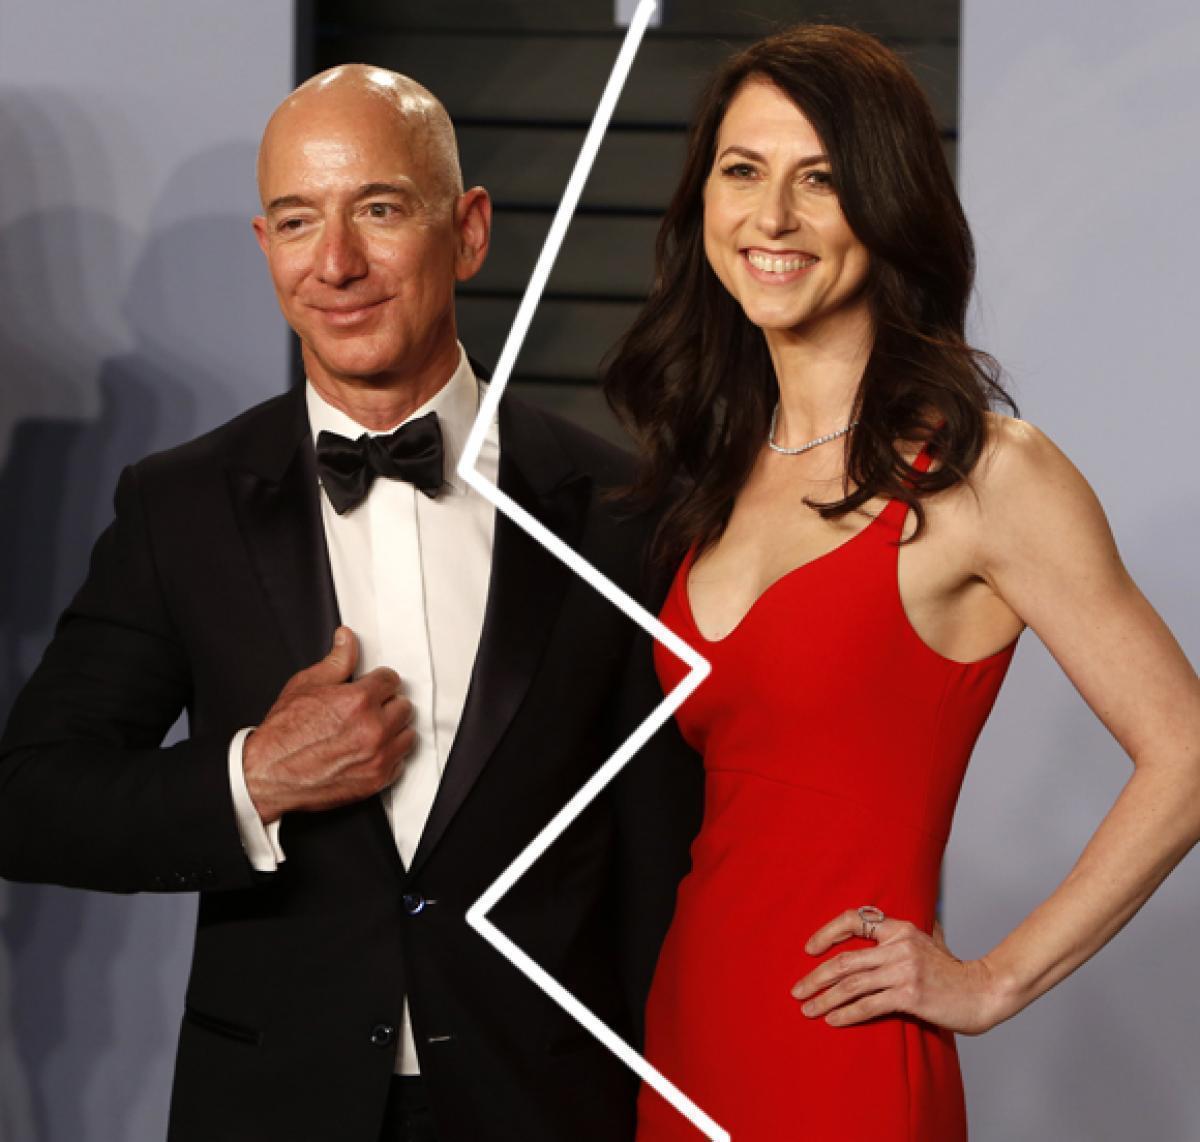 Amazon Ceo Jeff Bezos And Wife Mackenzie Splitting After 25 Years Their Divorce Could Be The 9764